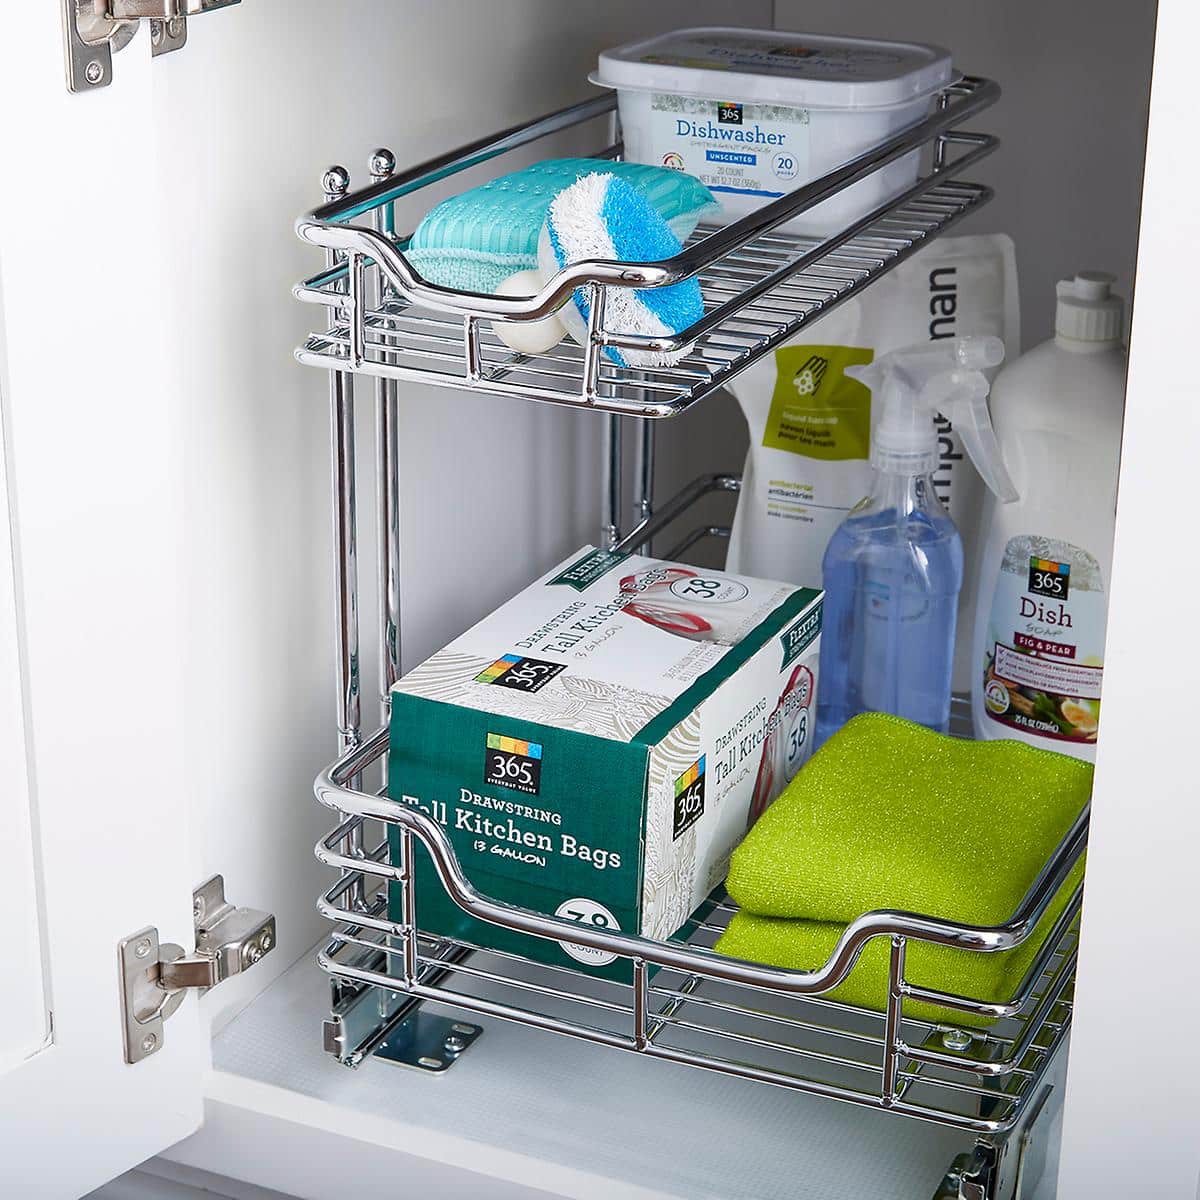 How to Add to Your Under-Sink Storage Without Drawers